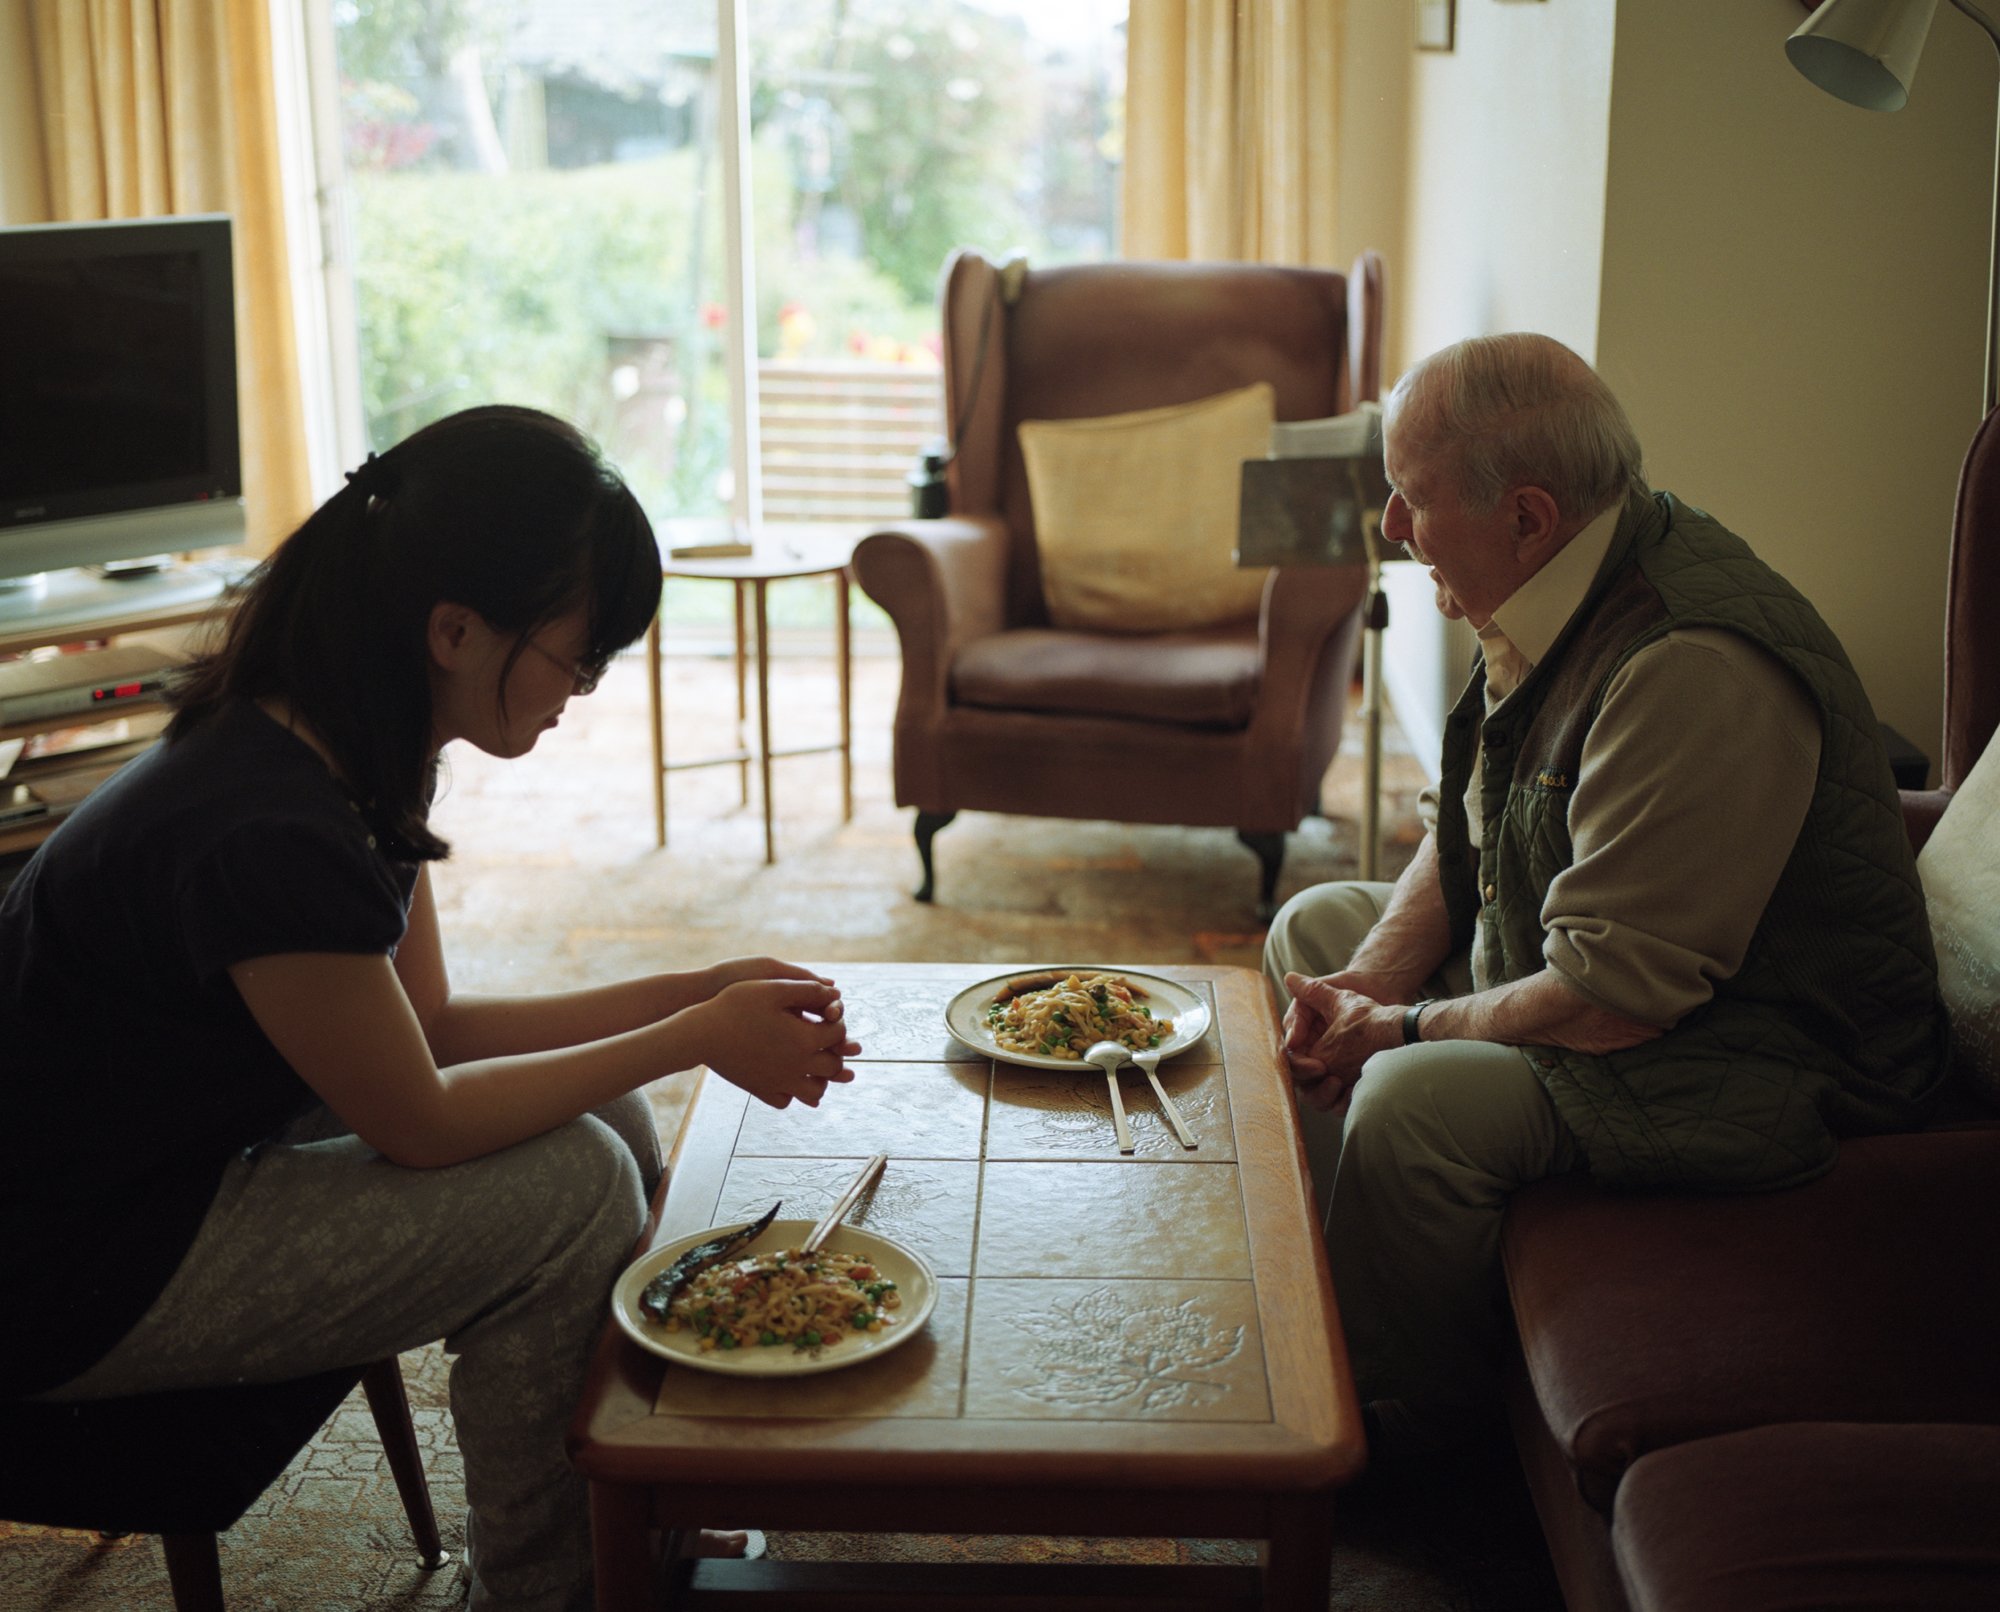  Qingqing, a student from Tianjin in China with her homestay host Uncle Douglas as they say grace before dinner, Sheffield.  